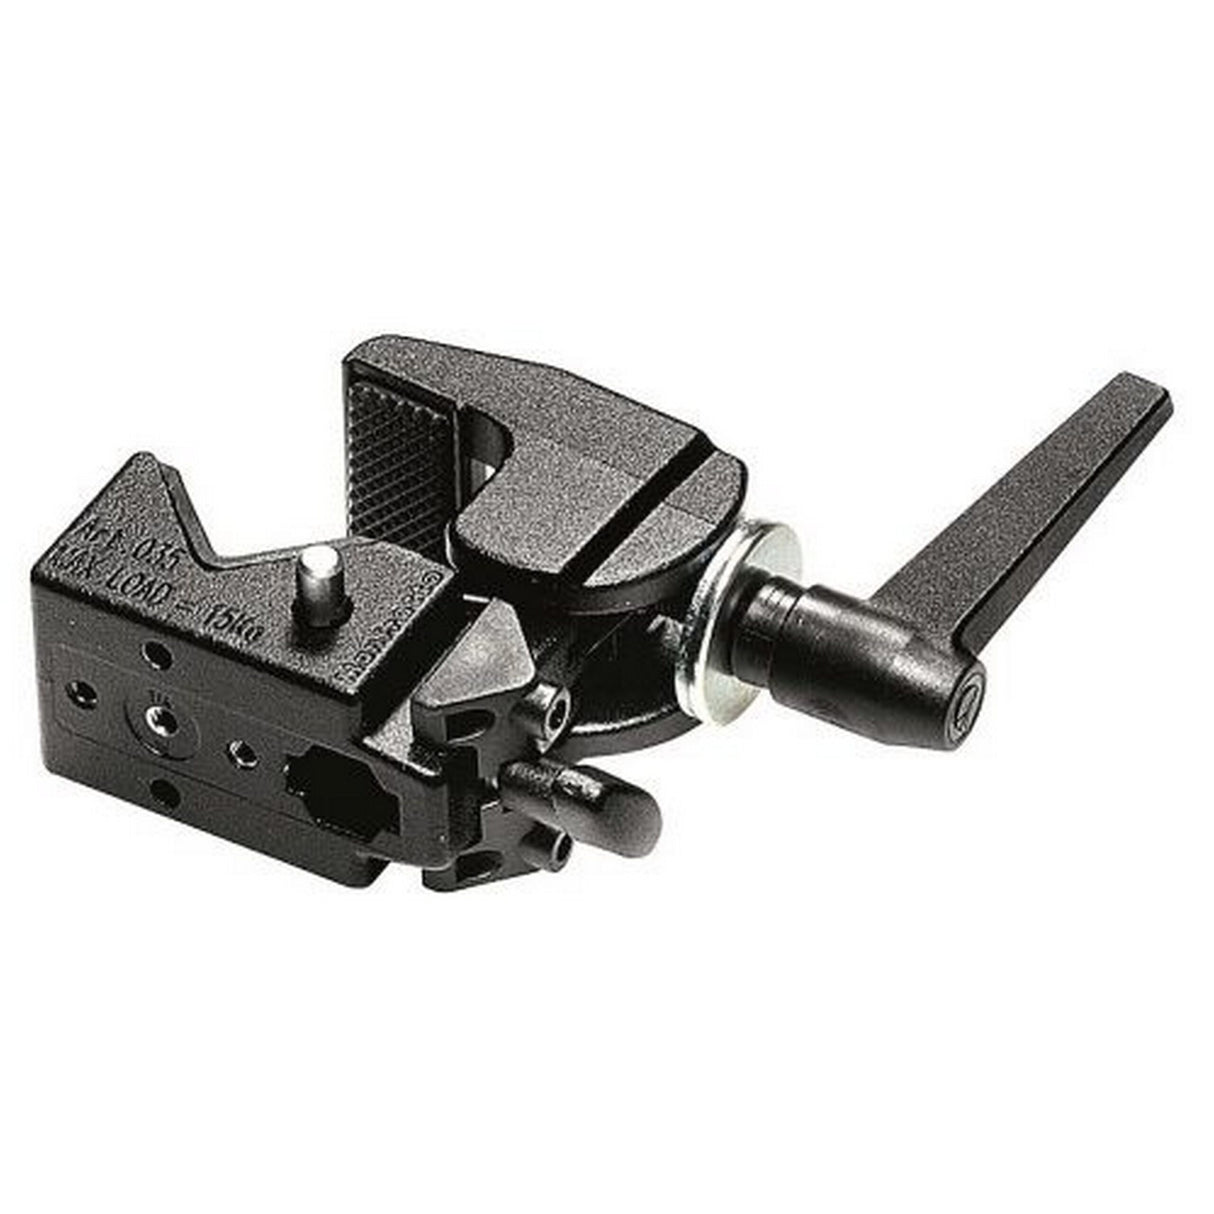 Manfrotto 035 Super Clamp without Stud, 035WDG Wedge